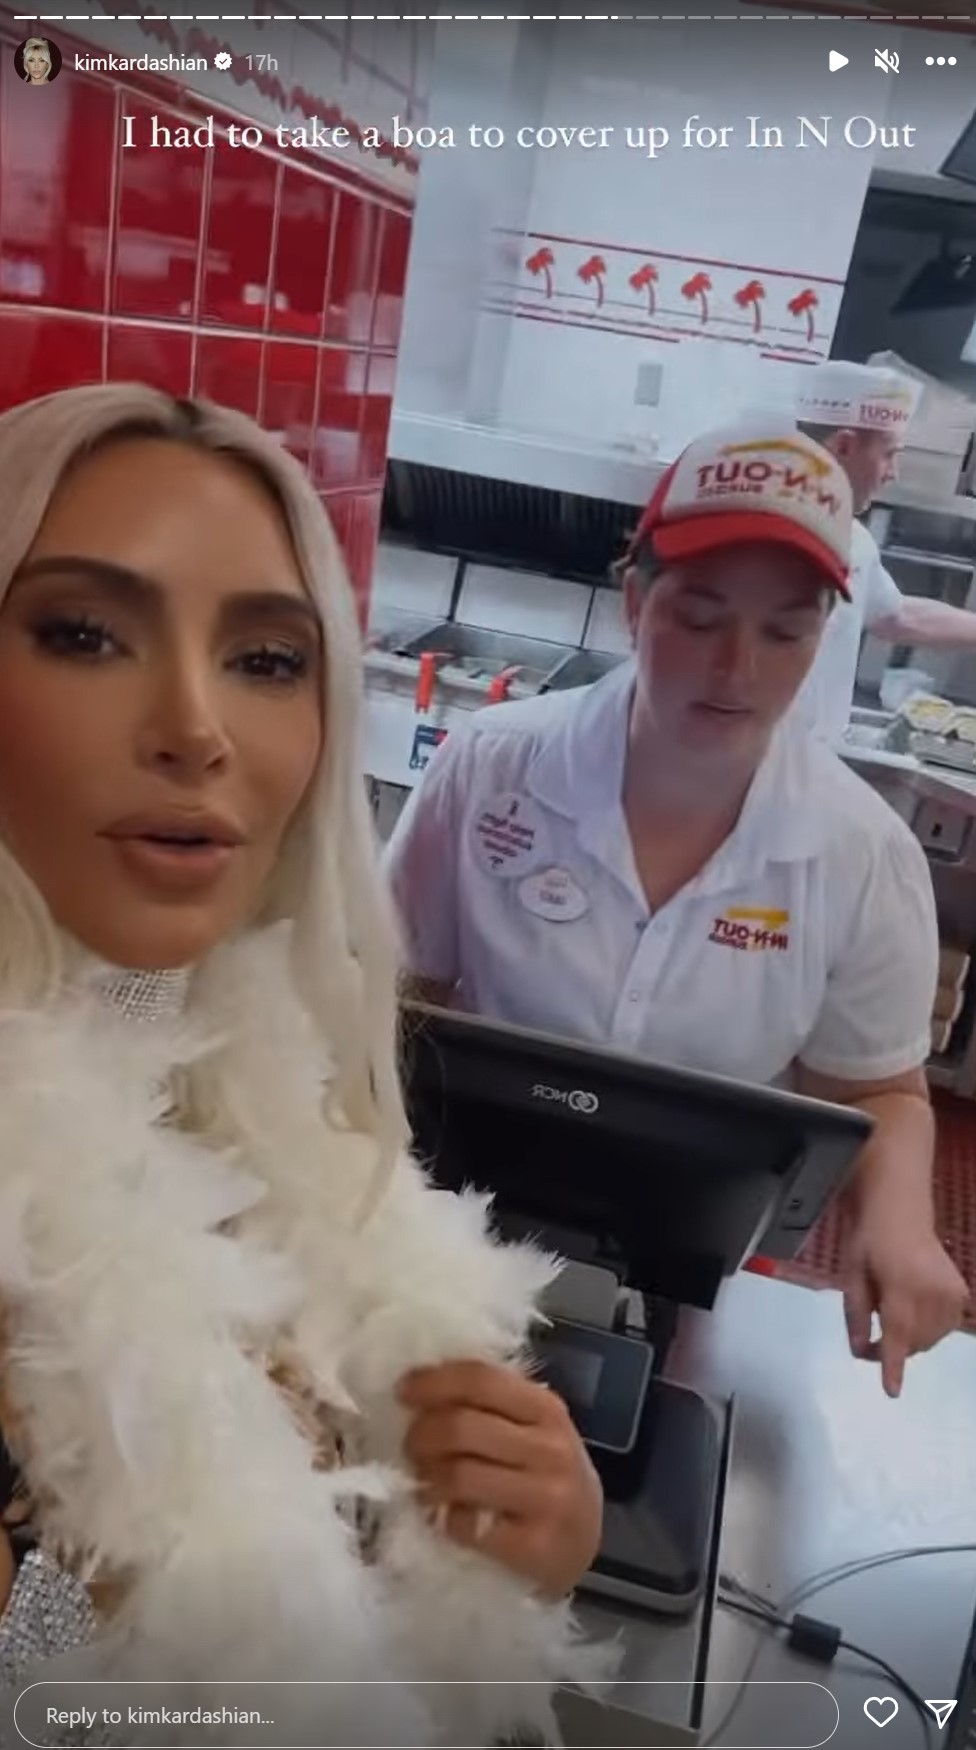 Kim Kardashian celebrates birthday at local In-N-Out Burger after interstate plans derailed due to bad weather.